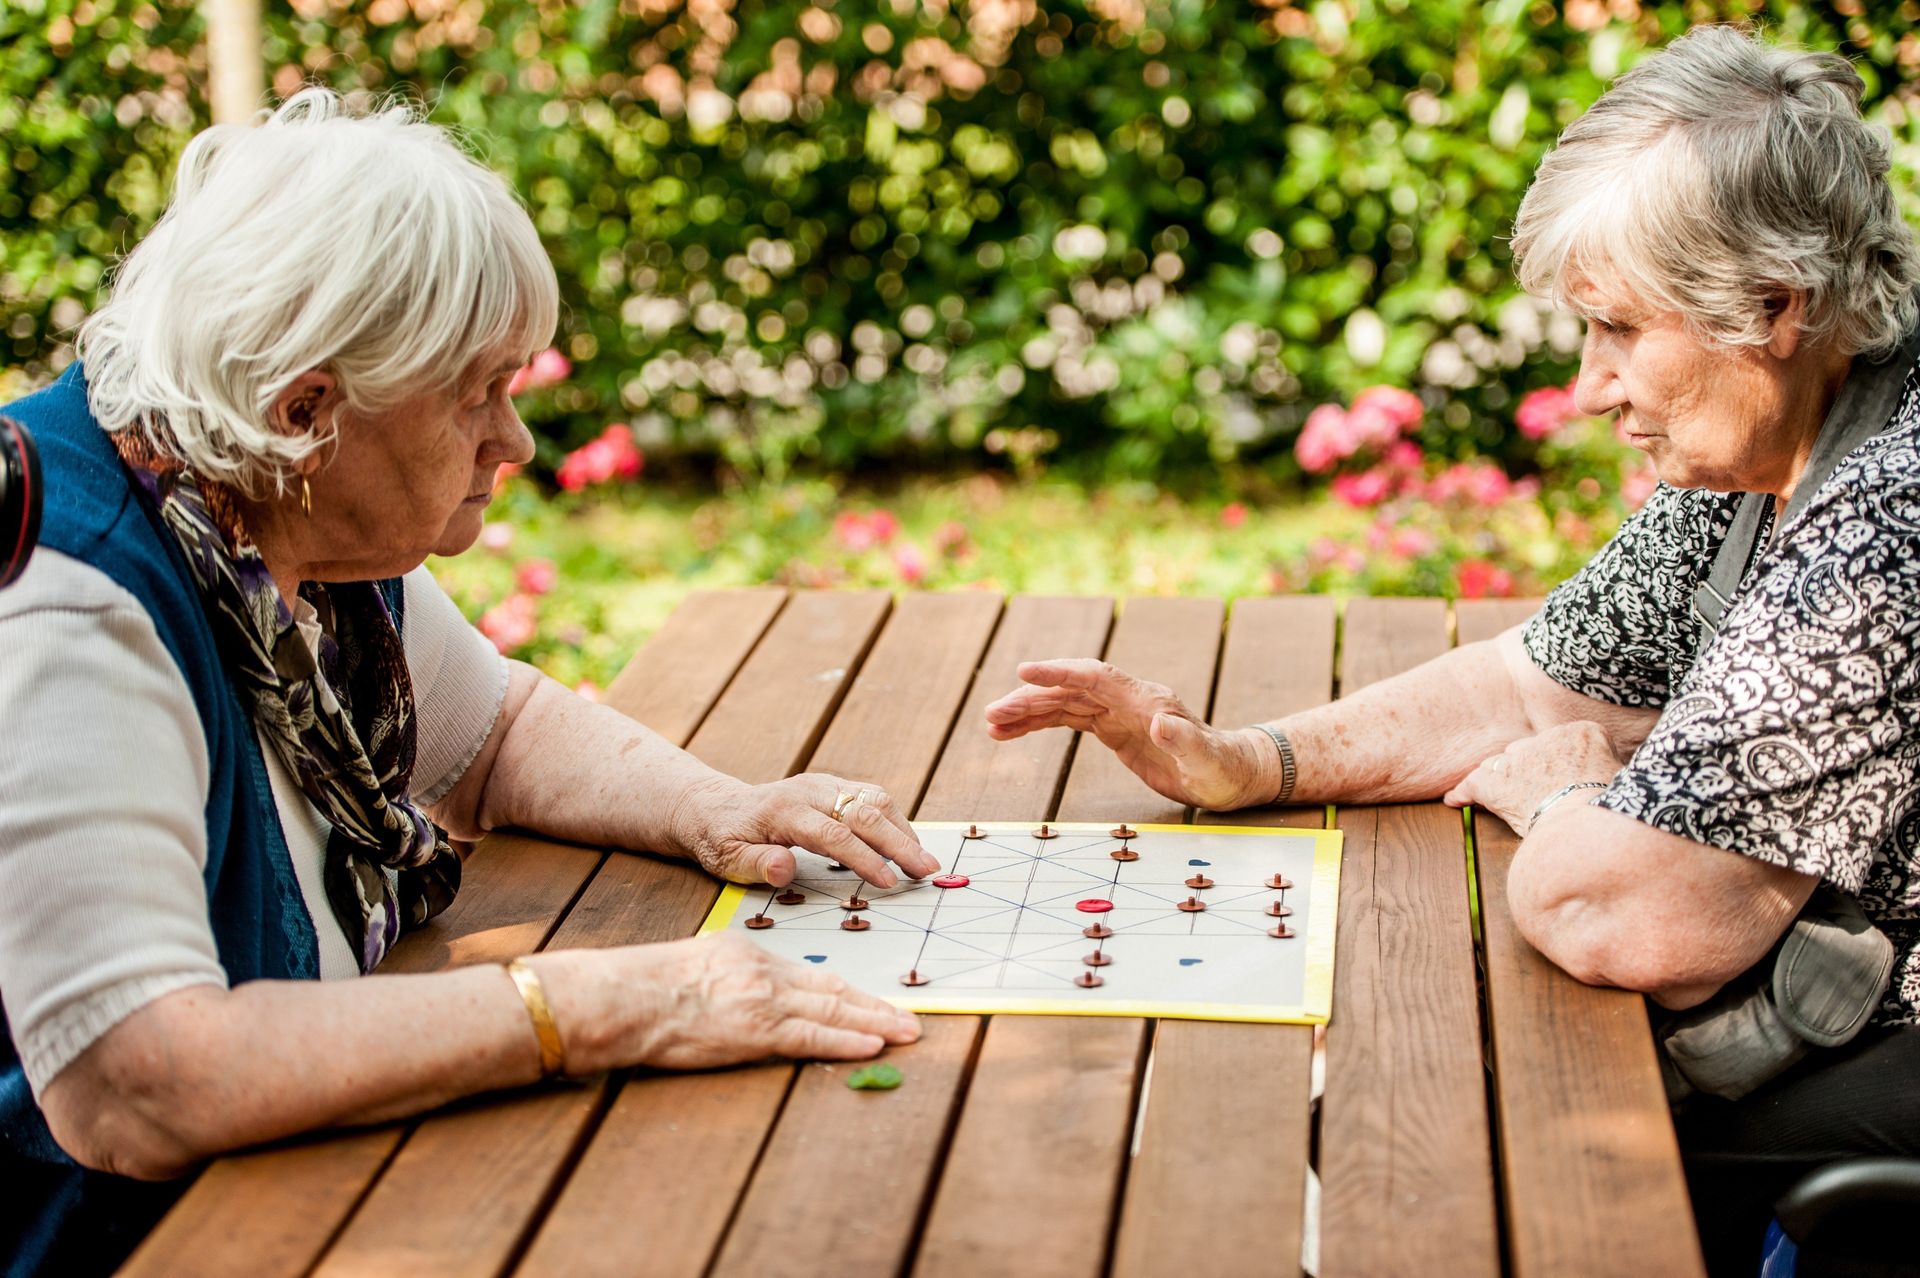 Avon Park Care Home Southampton residents playing board game